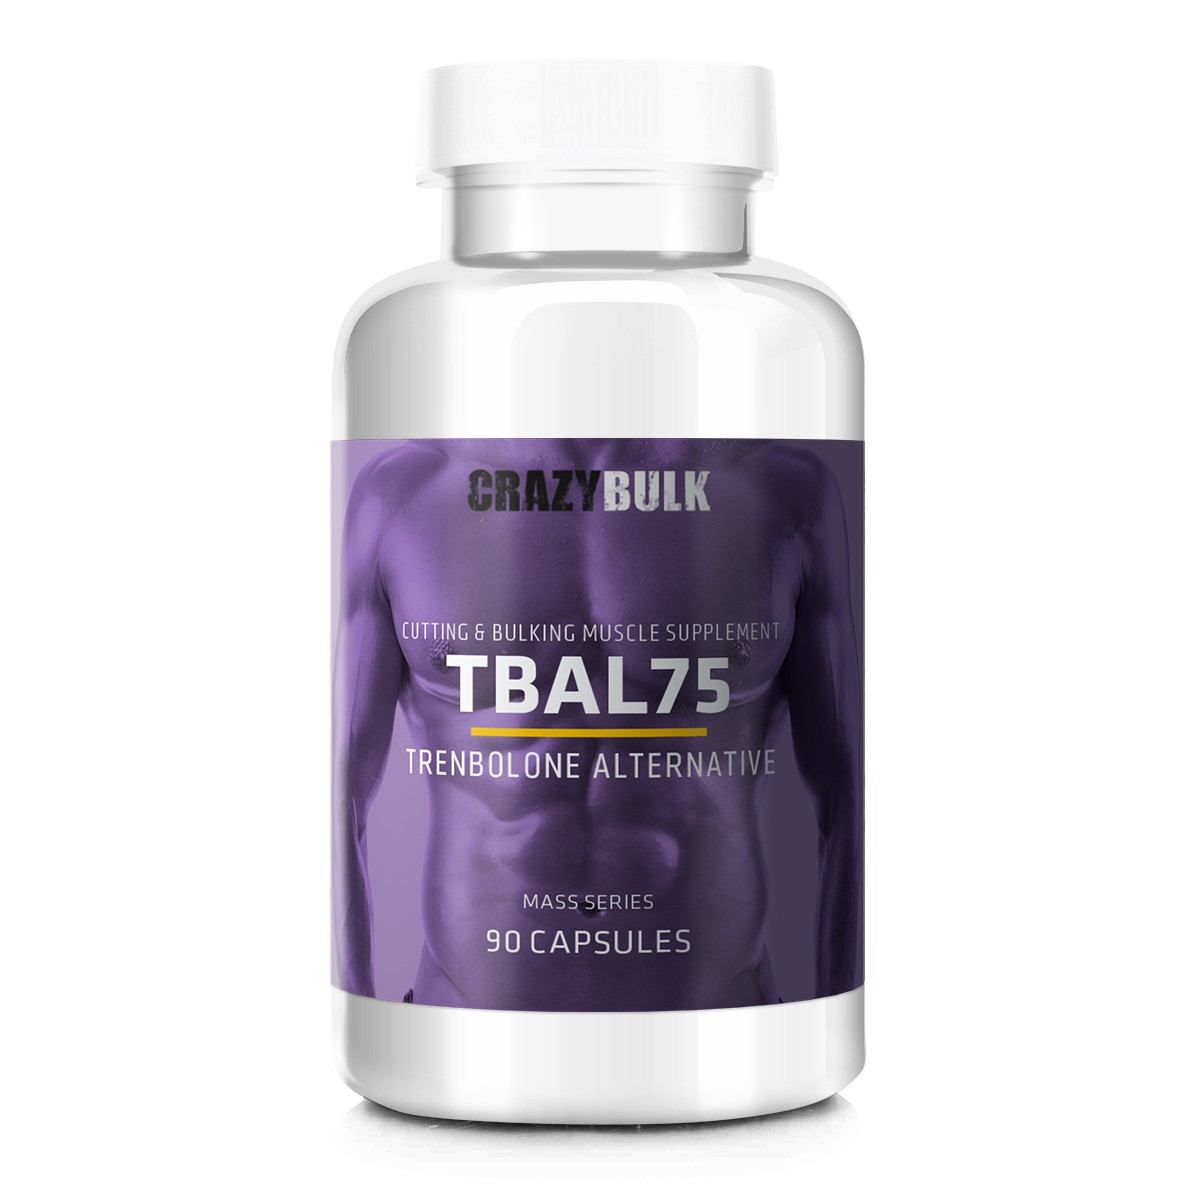 Vital proteins collagen peptides reviews weight loss